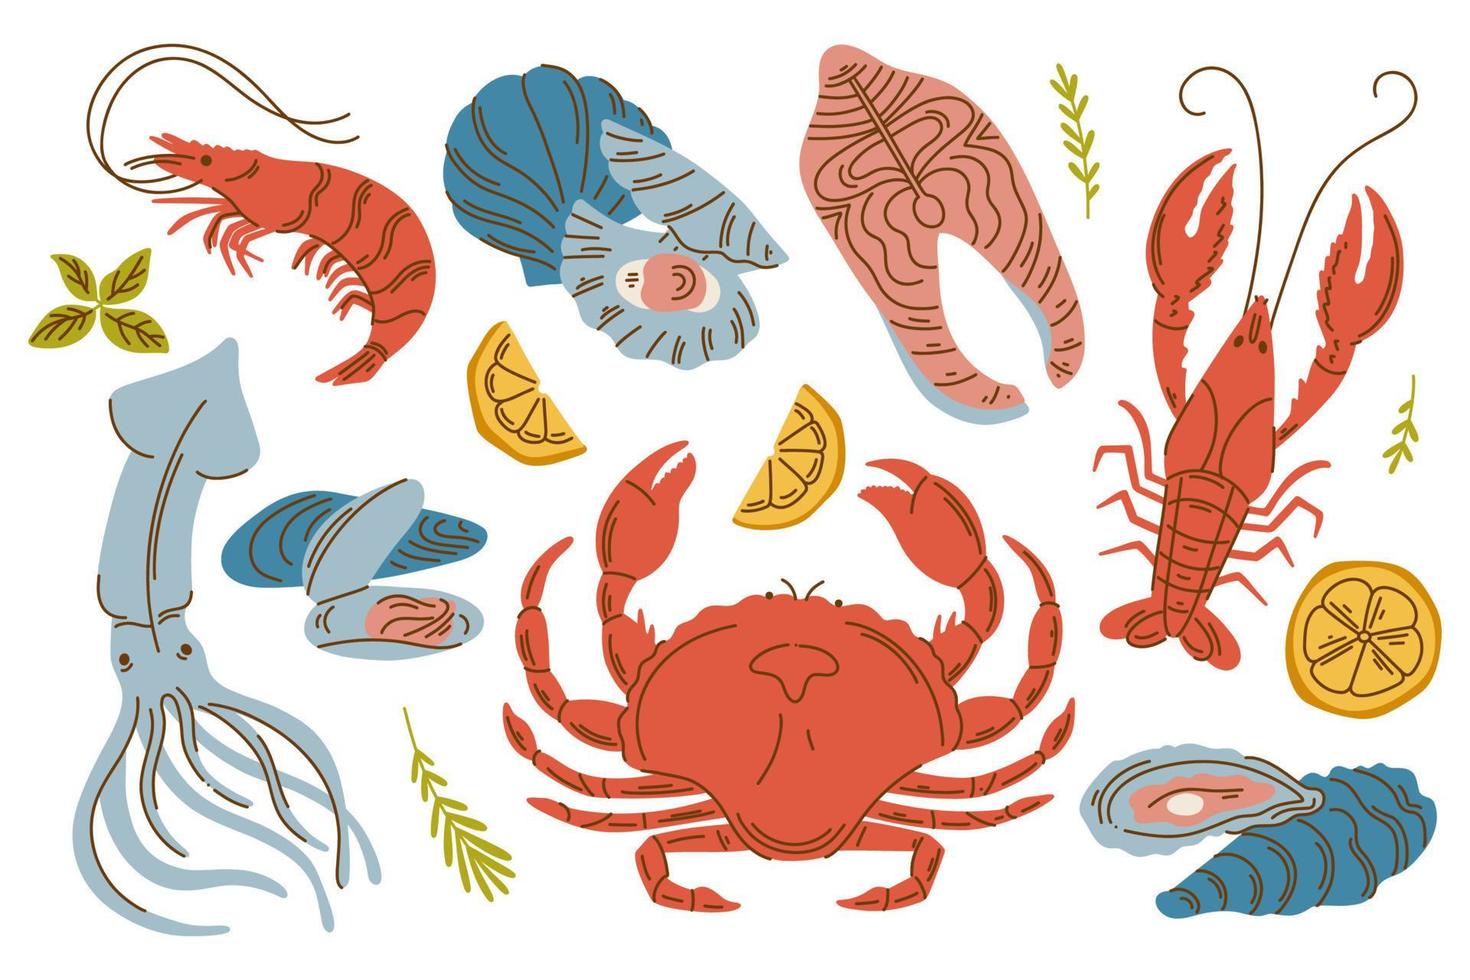 Vector hand drawn seafood set. Lobster, salmon, crab, shrimp, octopus, squid, clams. Delicious menu objects collection for restaurant, promotion market store flyer